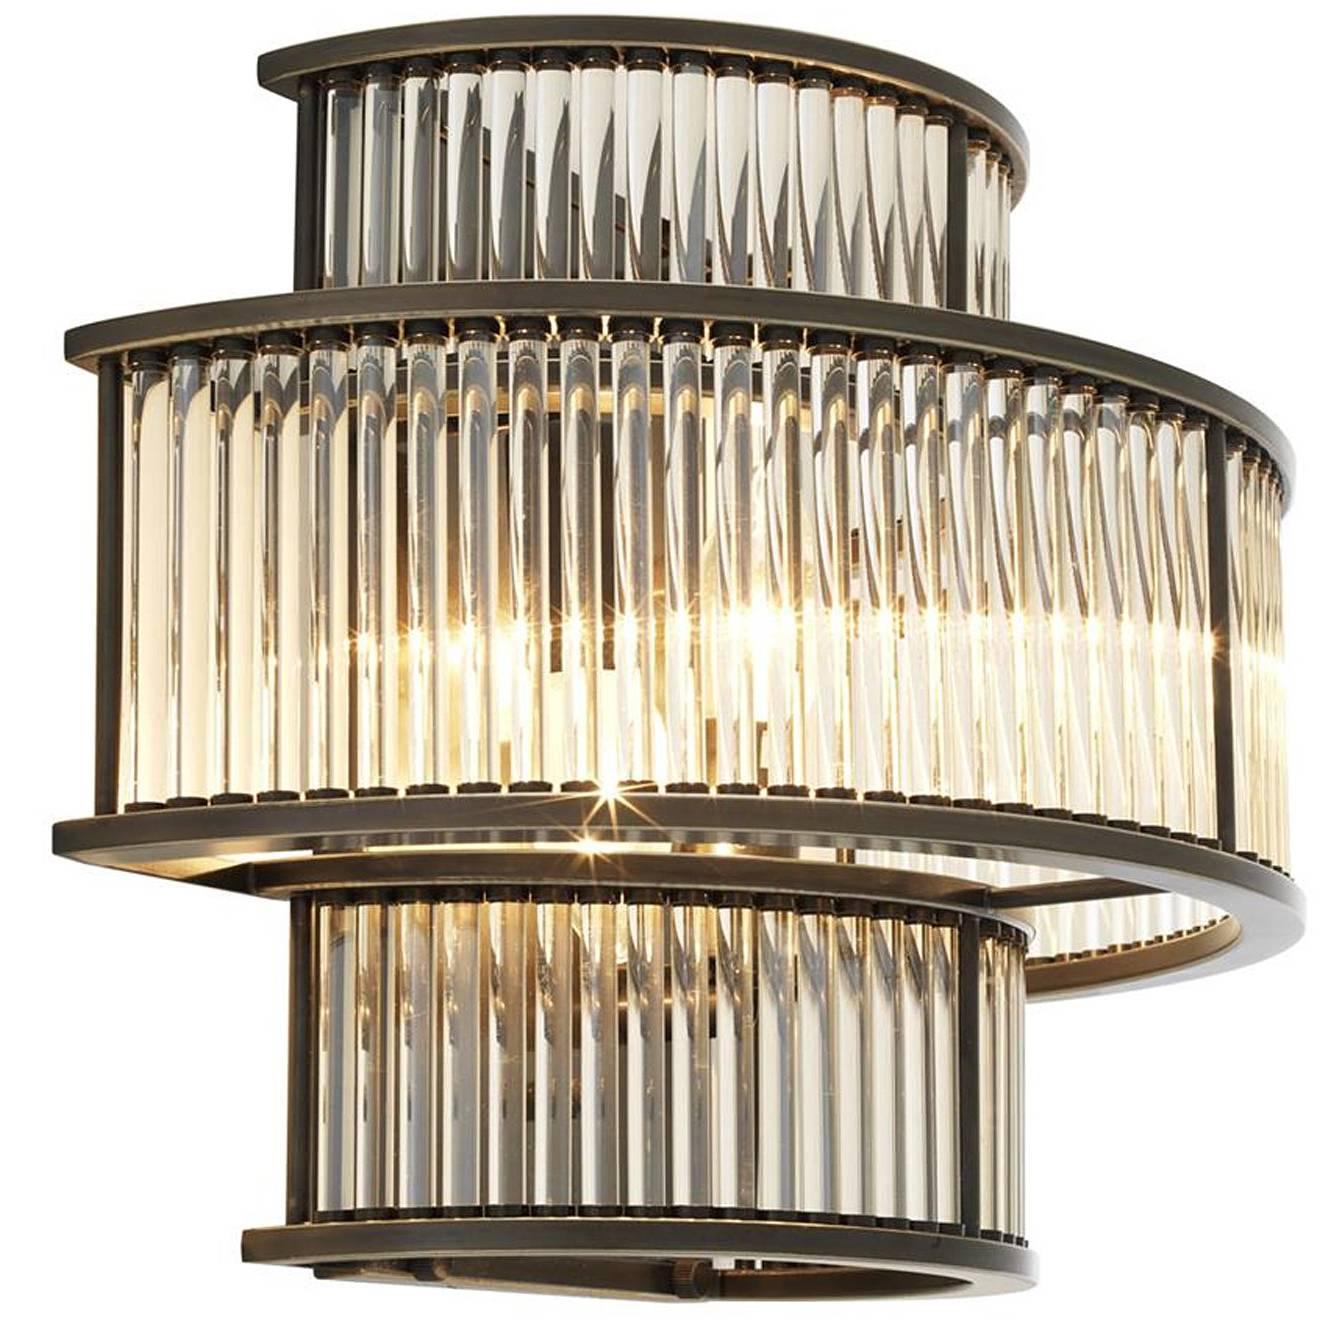 Glass Stairs Wall Lamp in Bronze Highlight Finish or in Nickel Finish